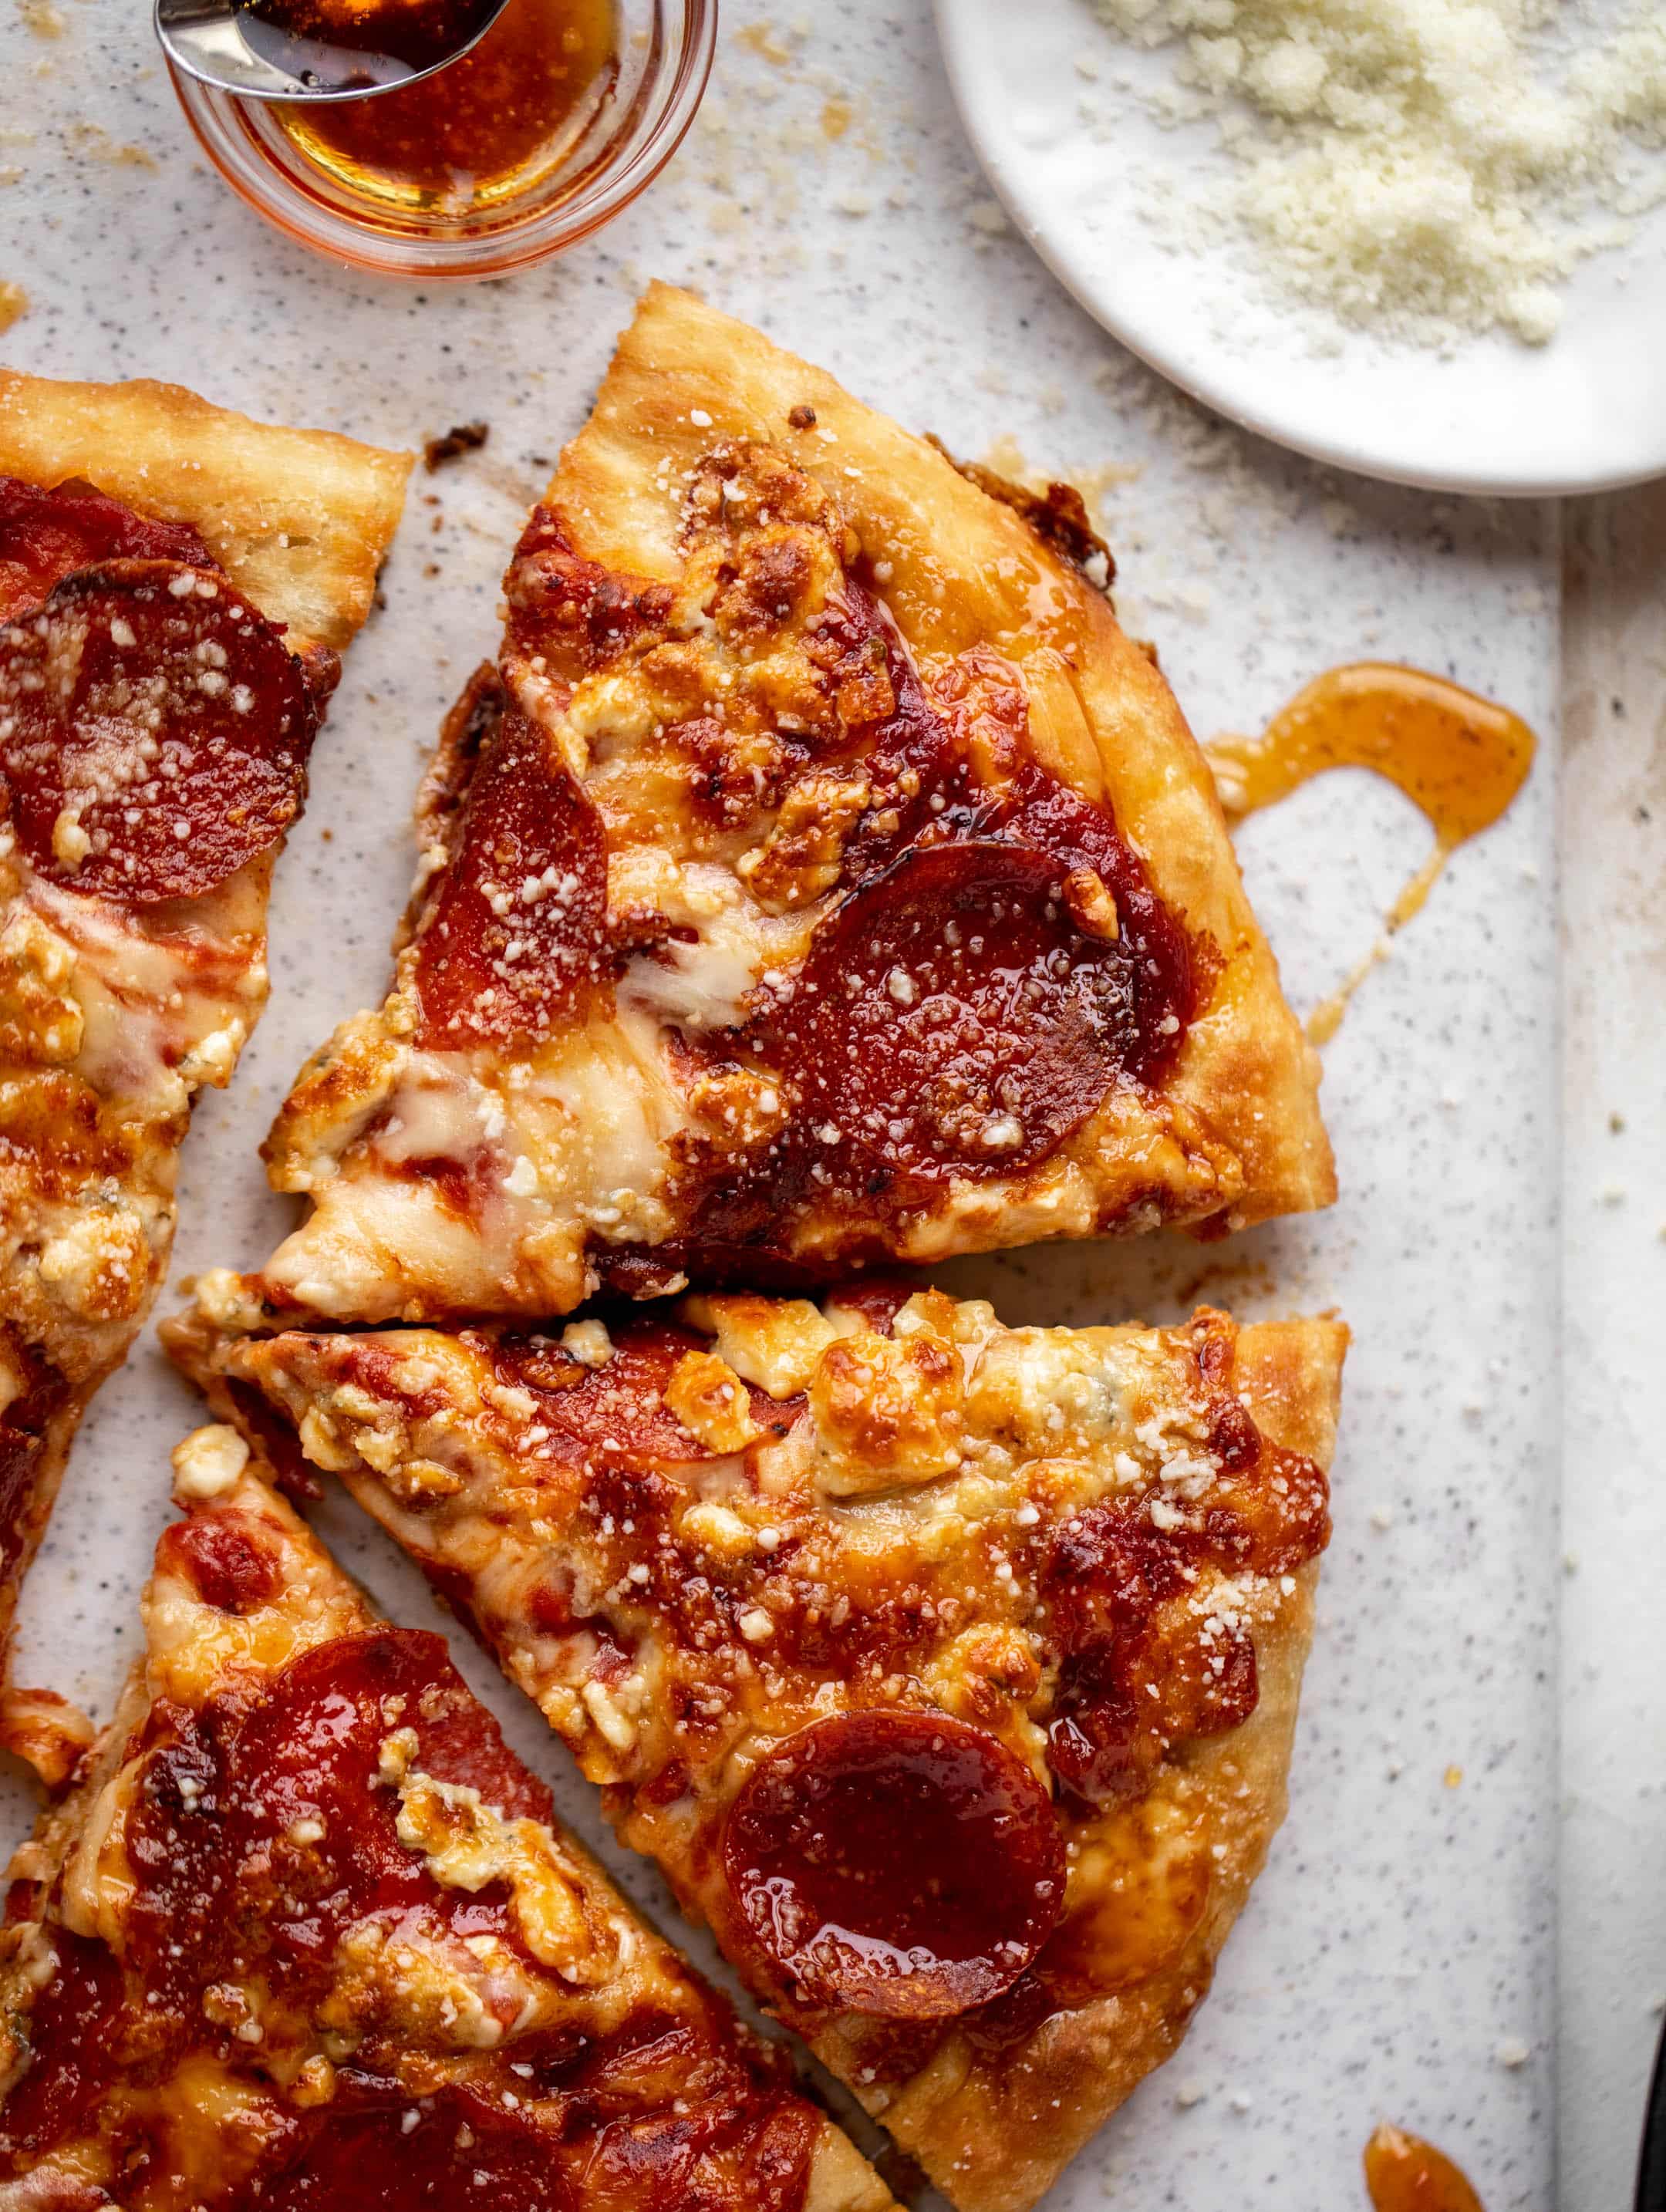 Skillet Pepperoni Pizza with Hot Honey and Blue Cheese